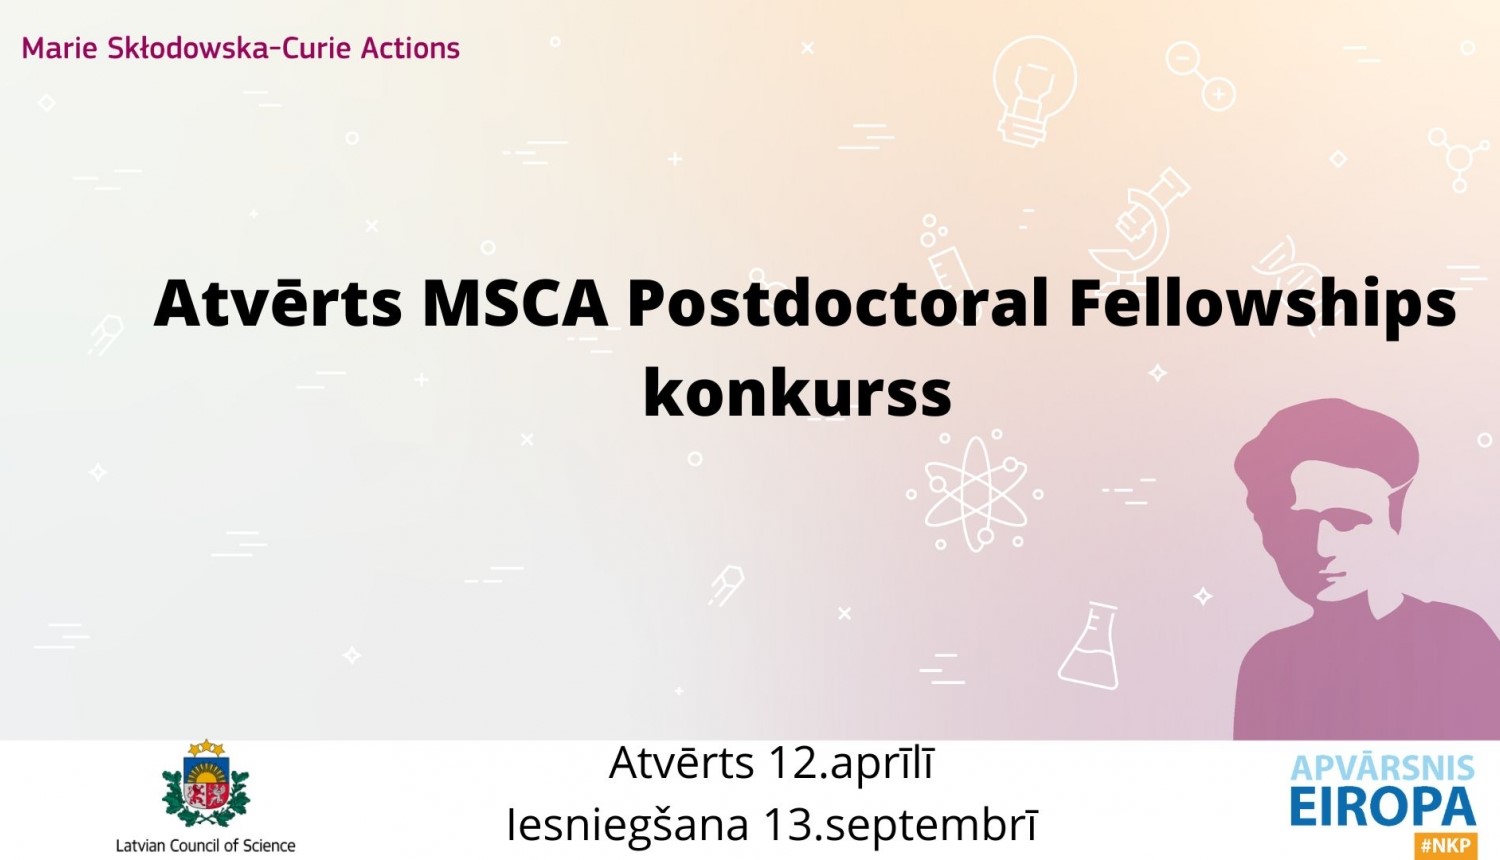 MSCA Postcoctoral Fellowships competition